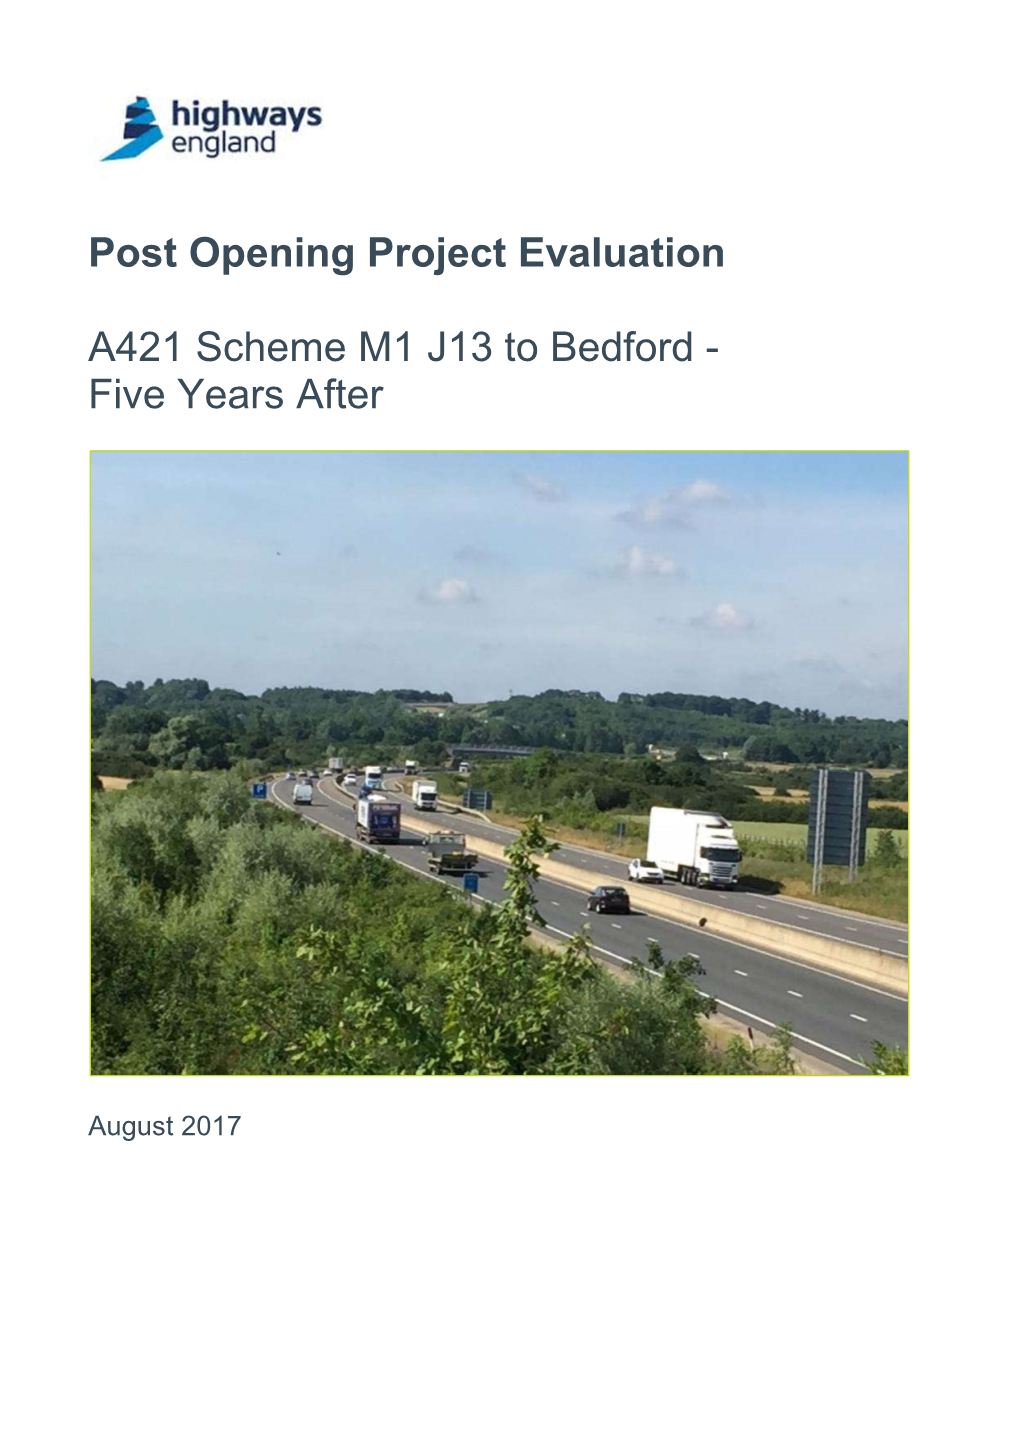 Post Opening Project Evaluation A421 Scheme M1 J13 to Bedford - Five Years After